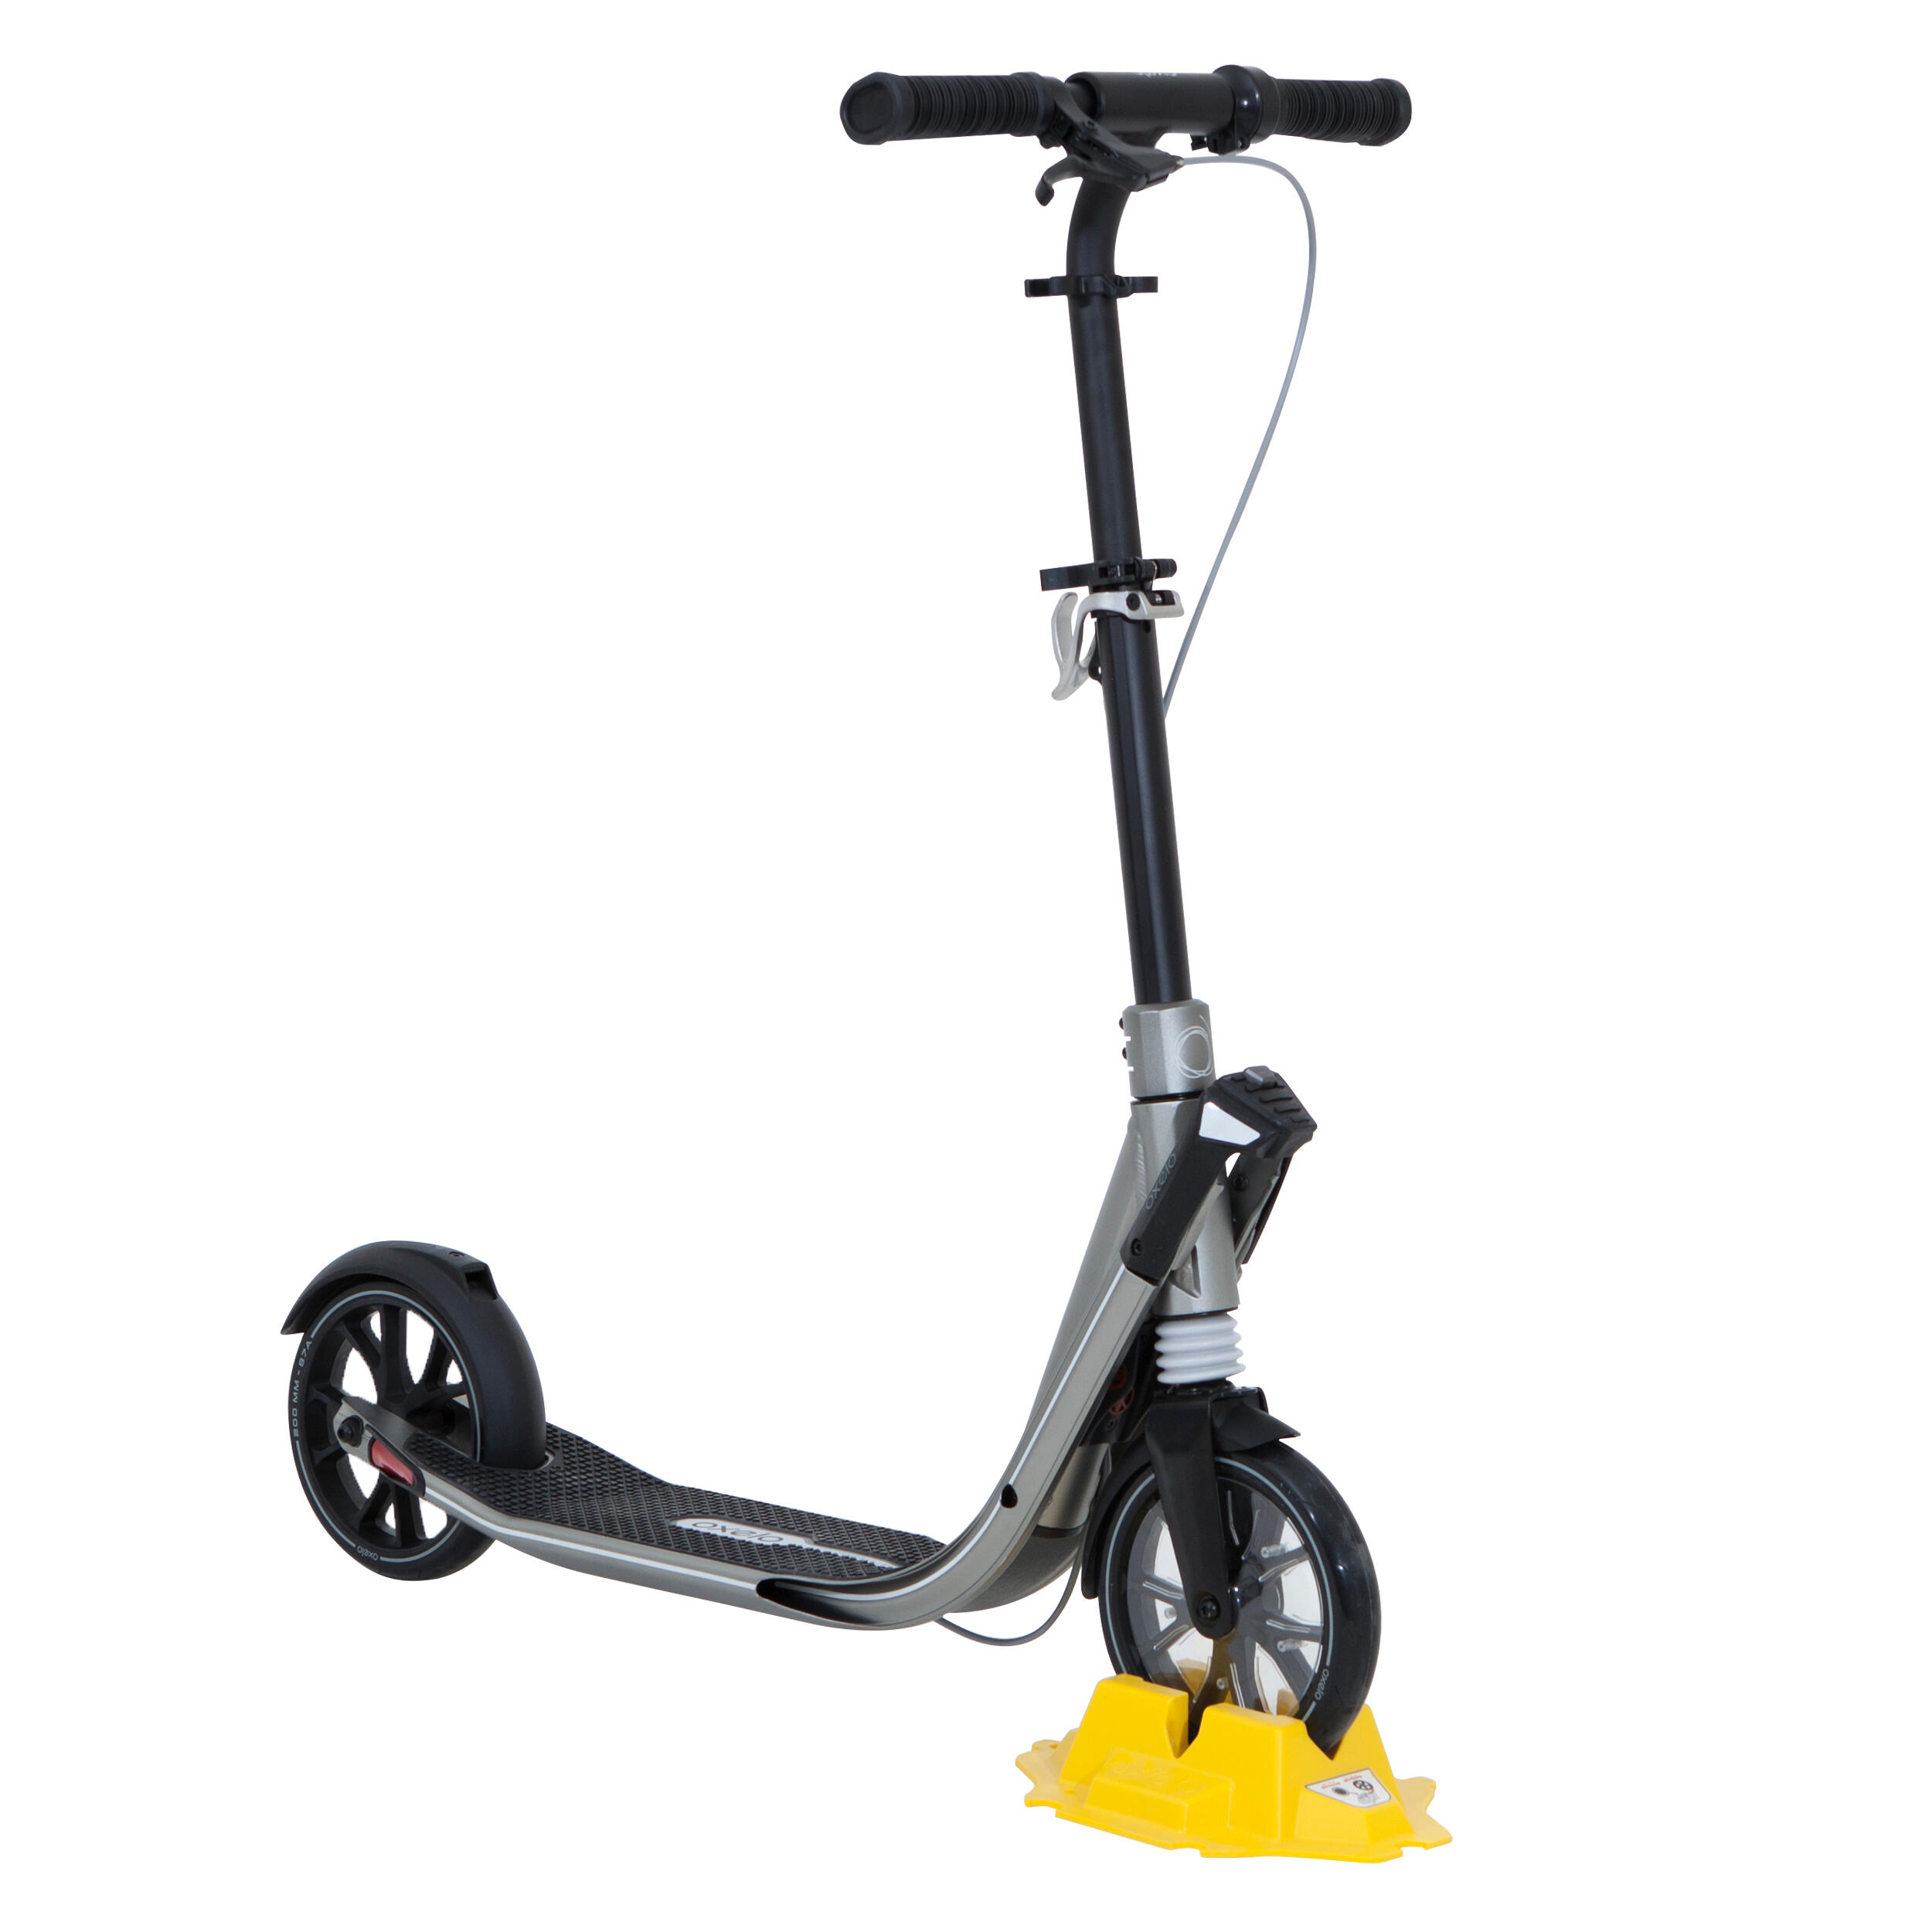 decathlon scooter stand